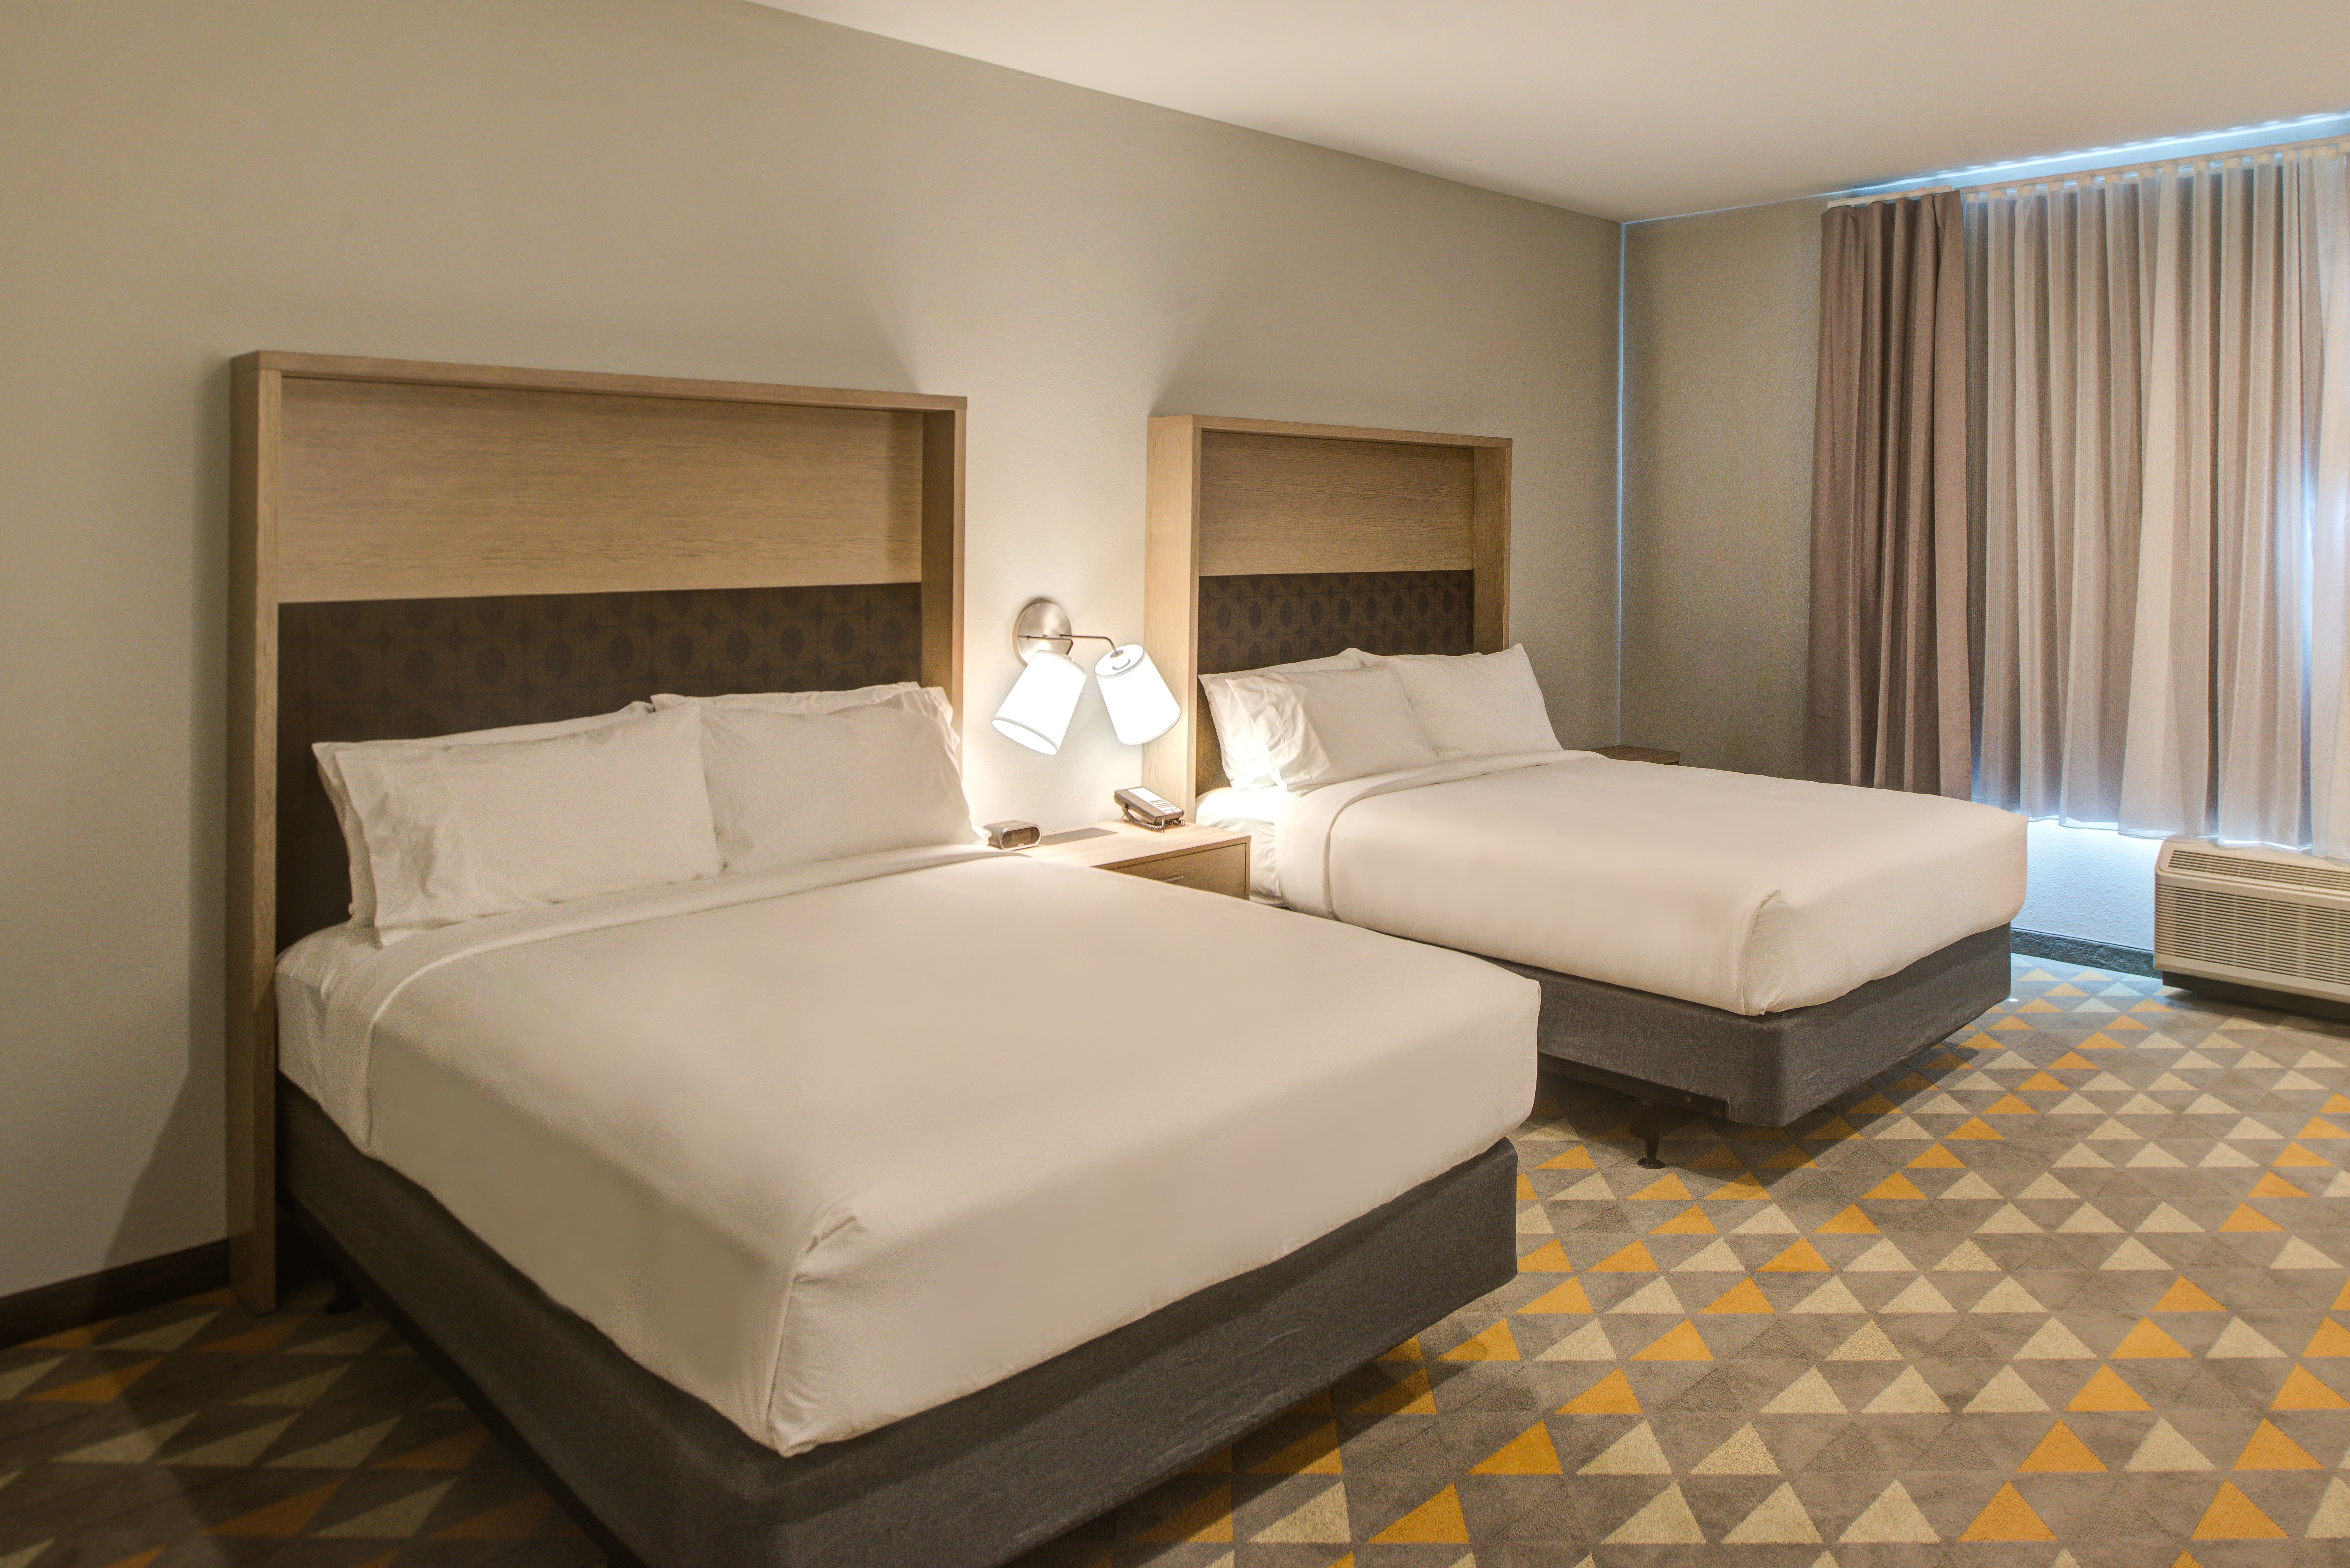 At the end of a long day, relax in our clean, fresh guest rooms